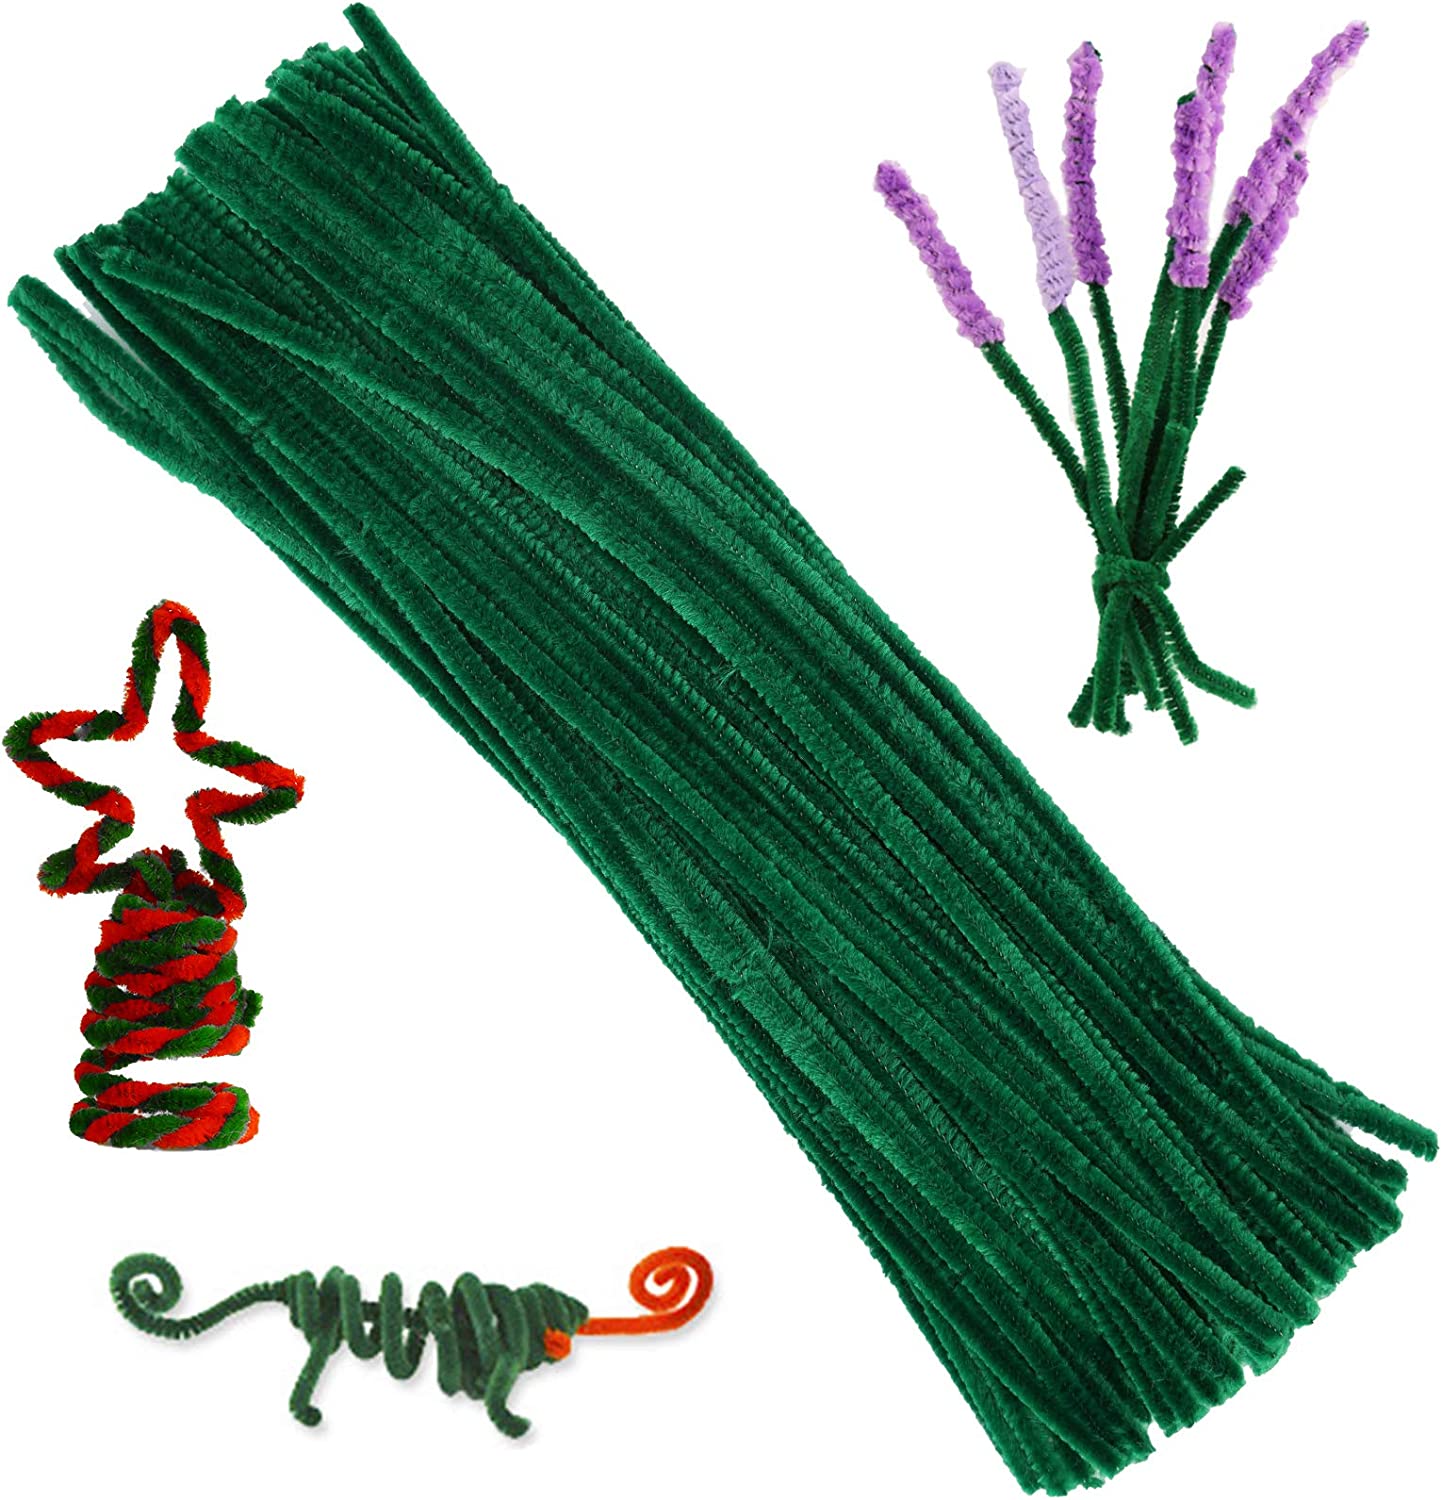 Craft Pipe Cleaners WholeSale - Price List, Bulk Buy at